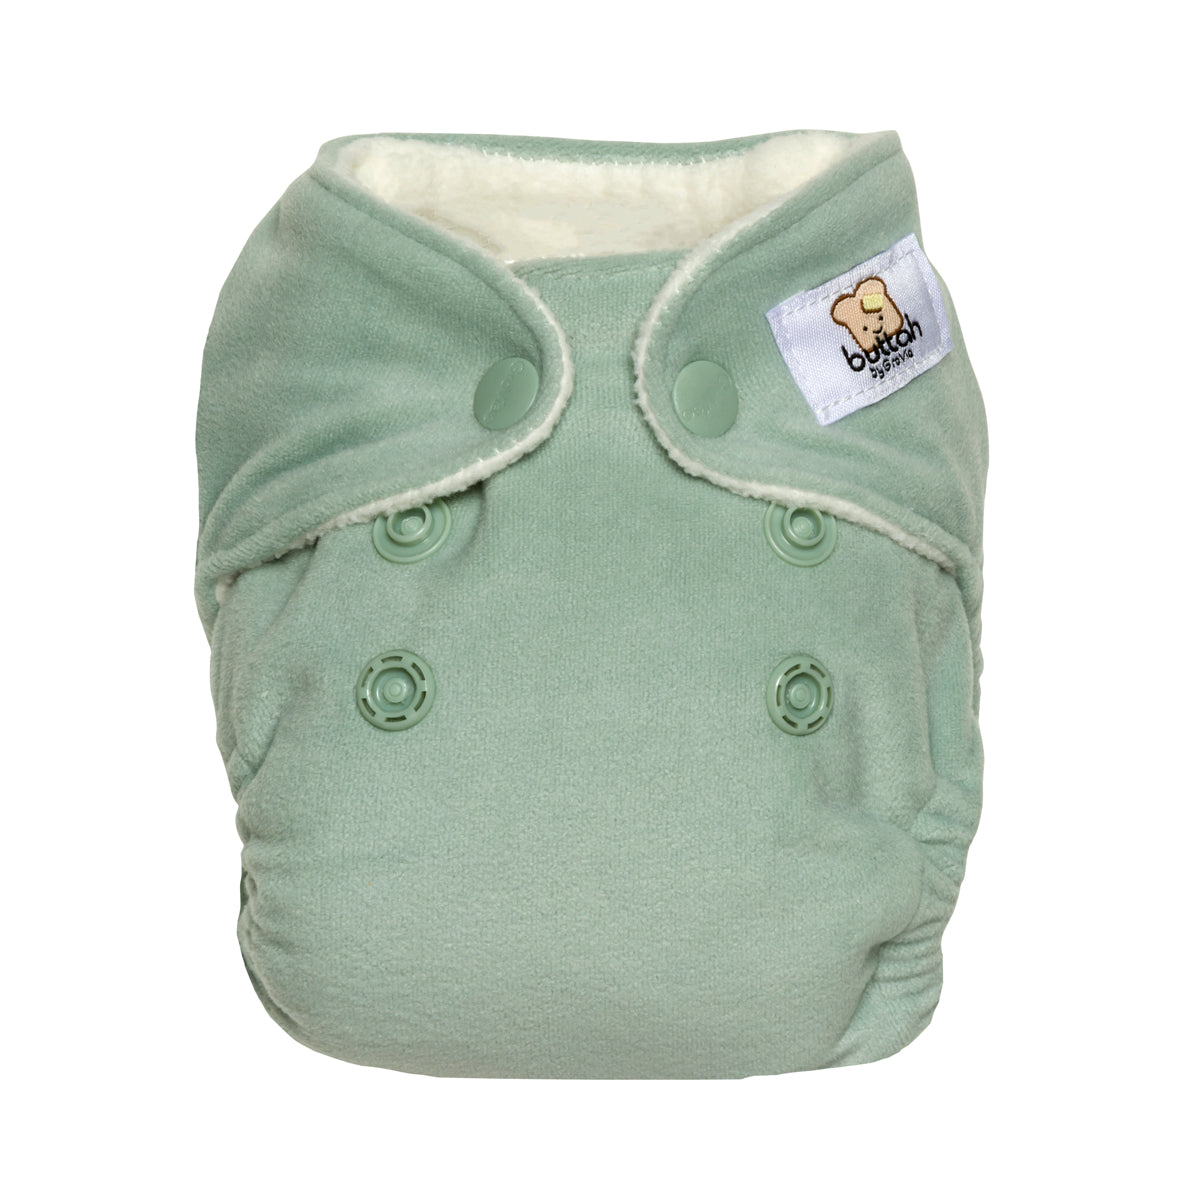 Glacier Buttah All in One Newborn Diaper - Crunch Natural Parenting is where to buy